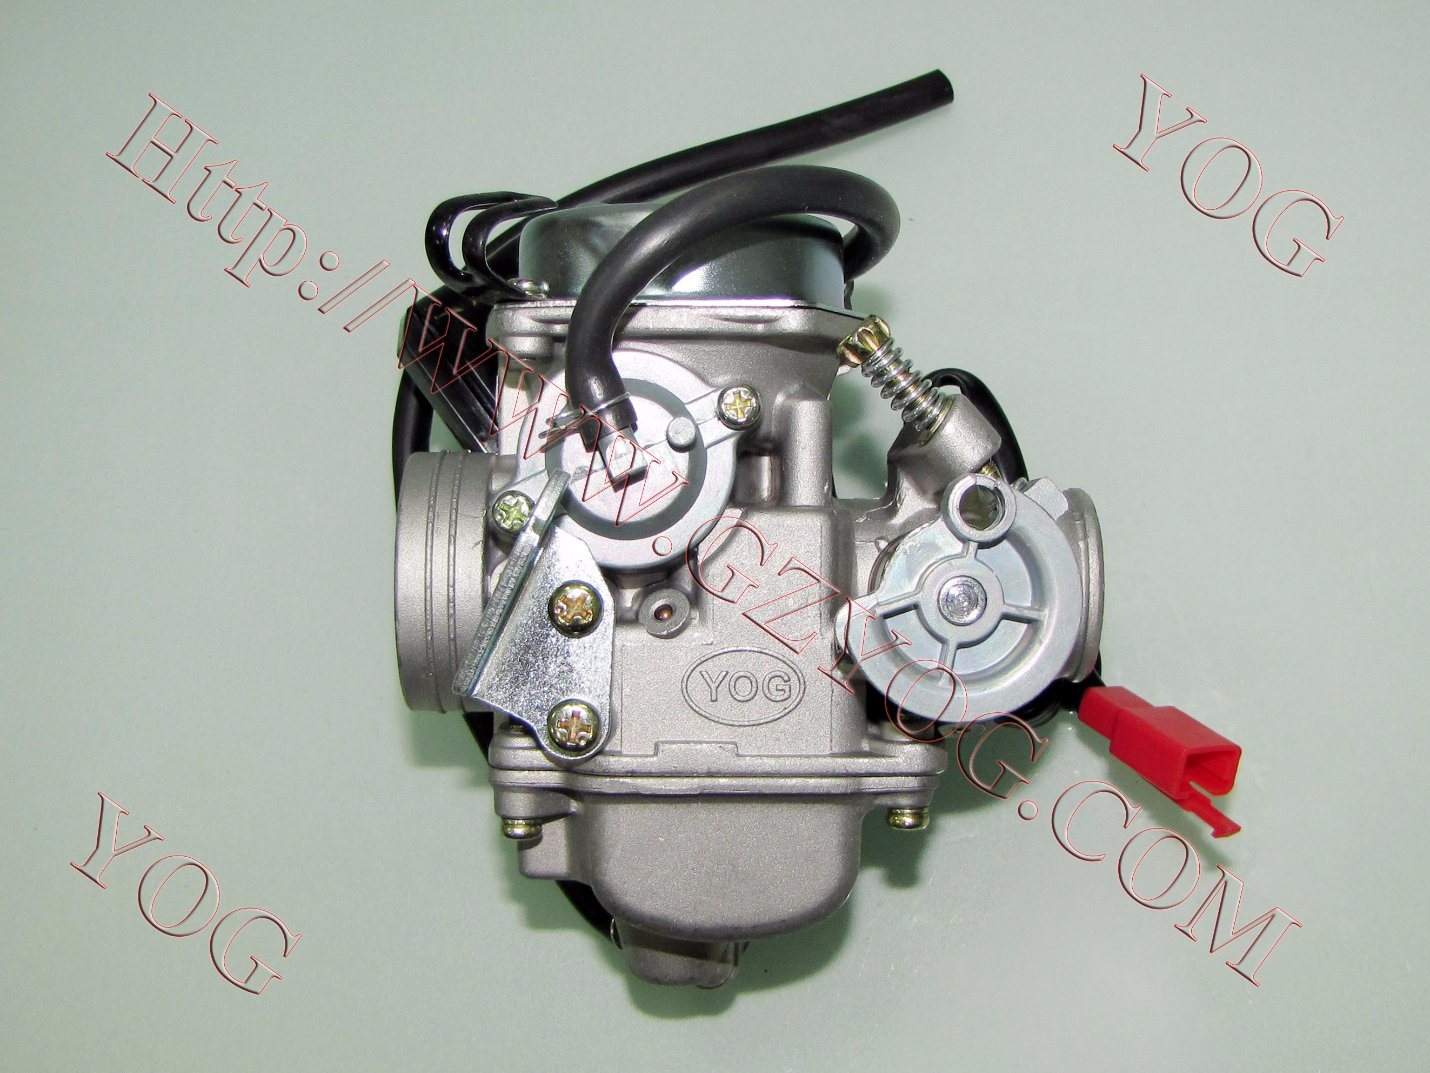 Motorcycle Spare Parts Motorcycle Carburetor for Gy6-50 Cy6-80 Gy6-125 Gy6-150 ATV150 Vitalia-125